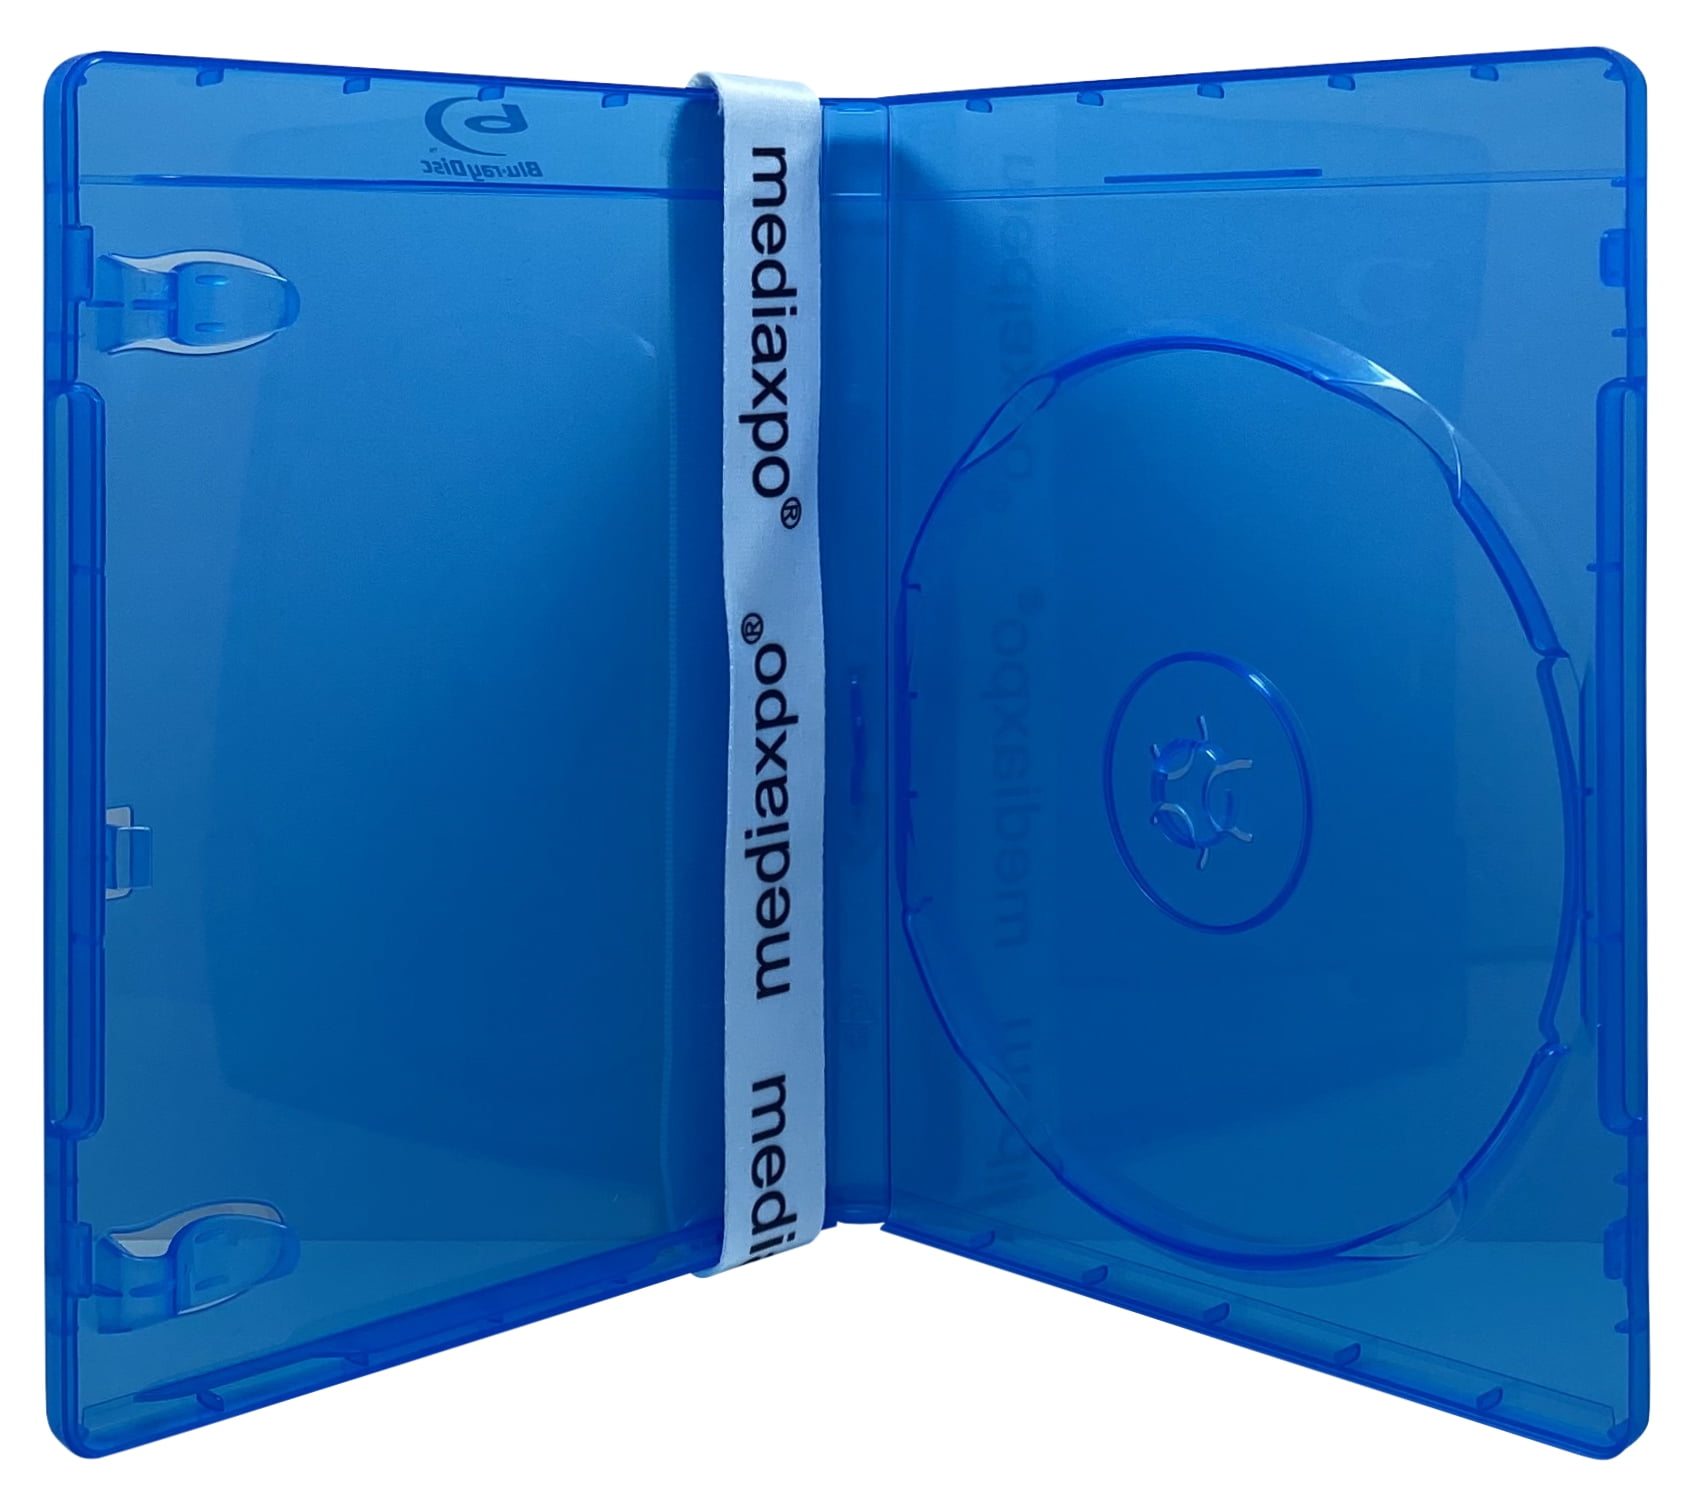 Clear Bluray 14mm Spine Holder for Standard USB Stick & Disc Empty Blu-ray Case 